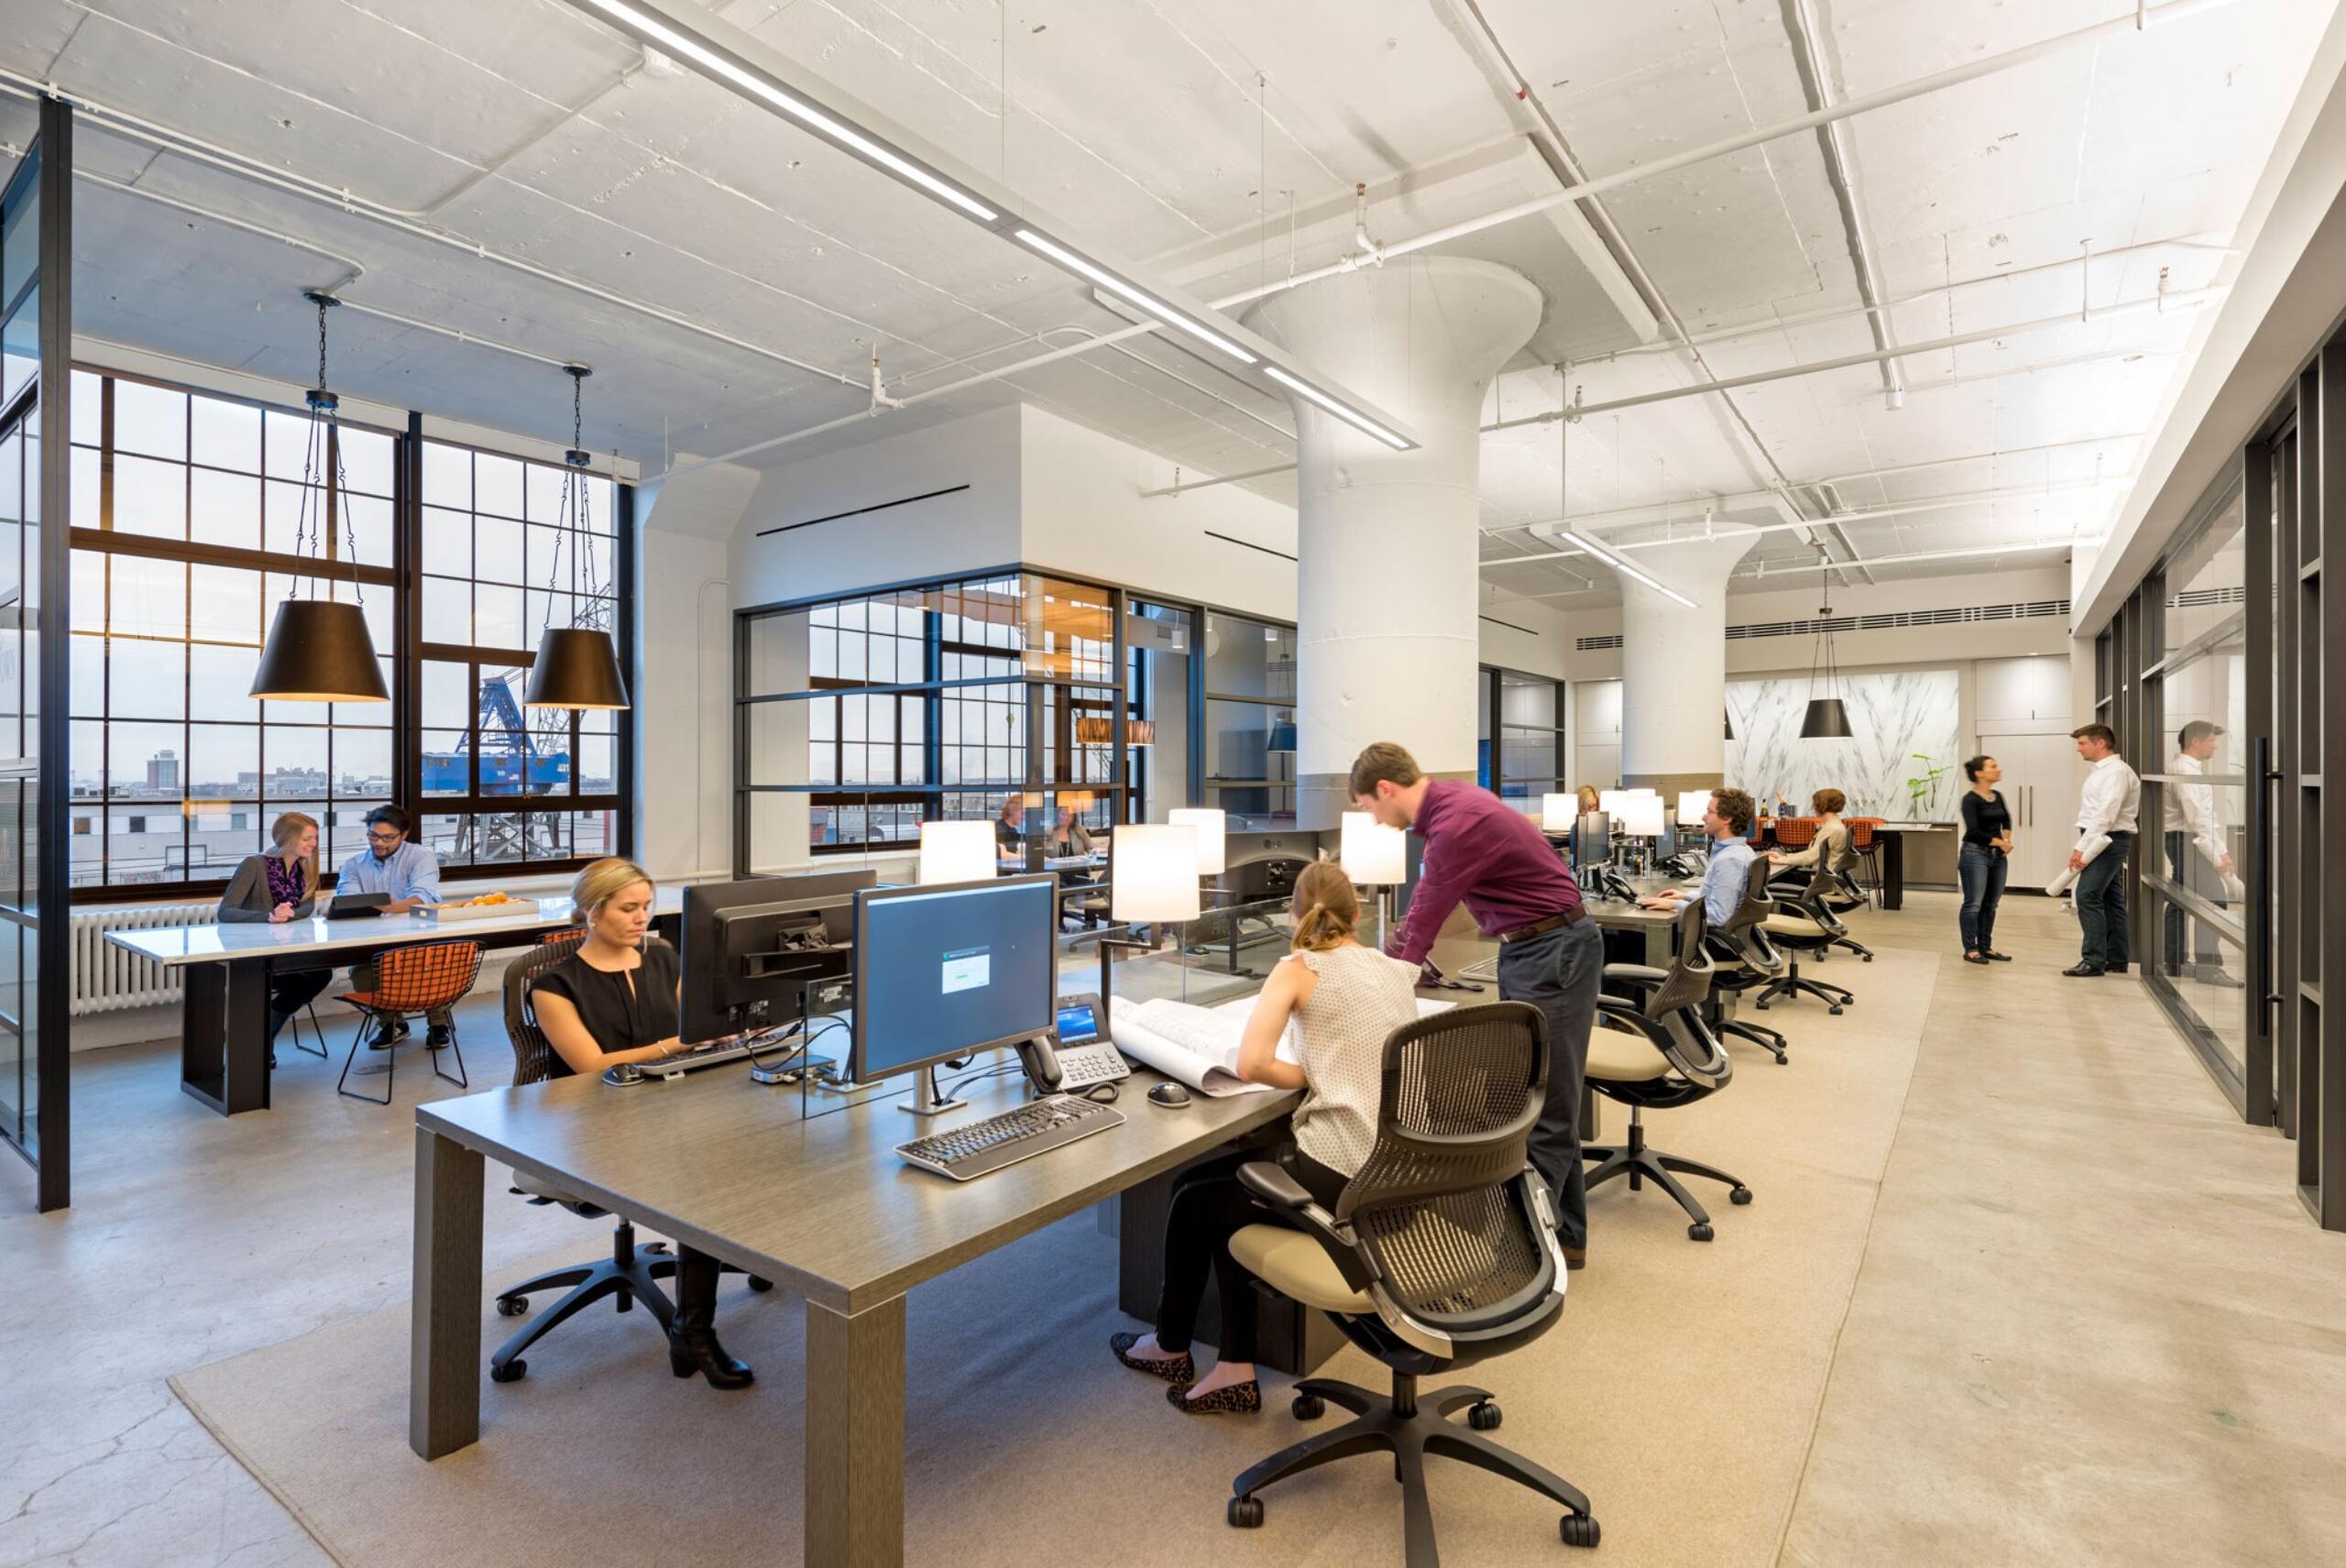 People working in large open office